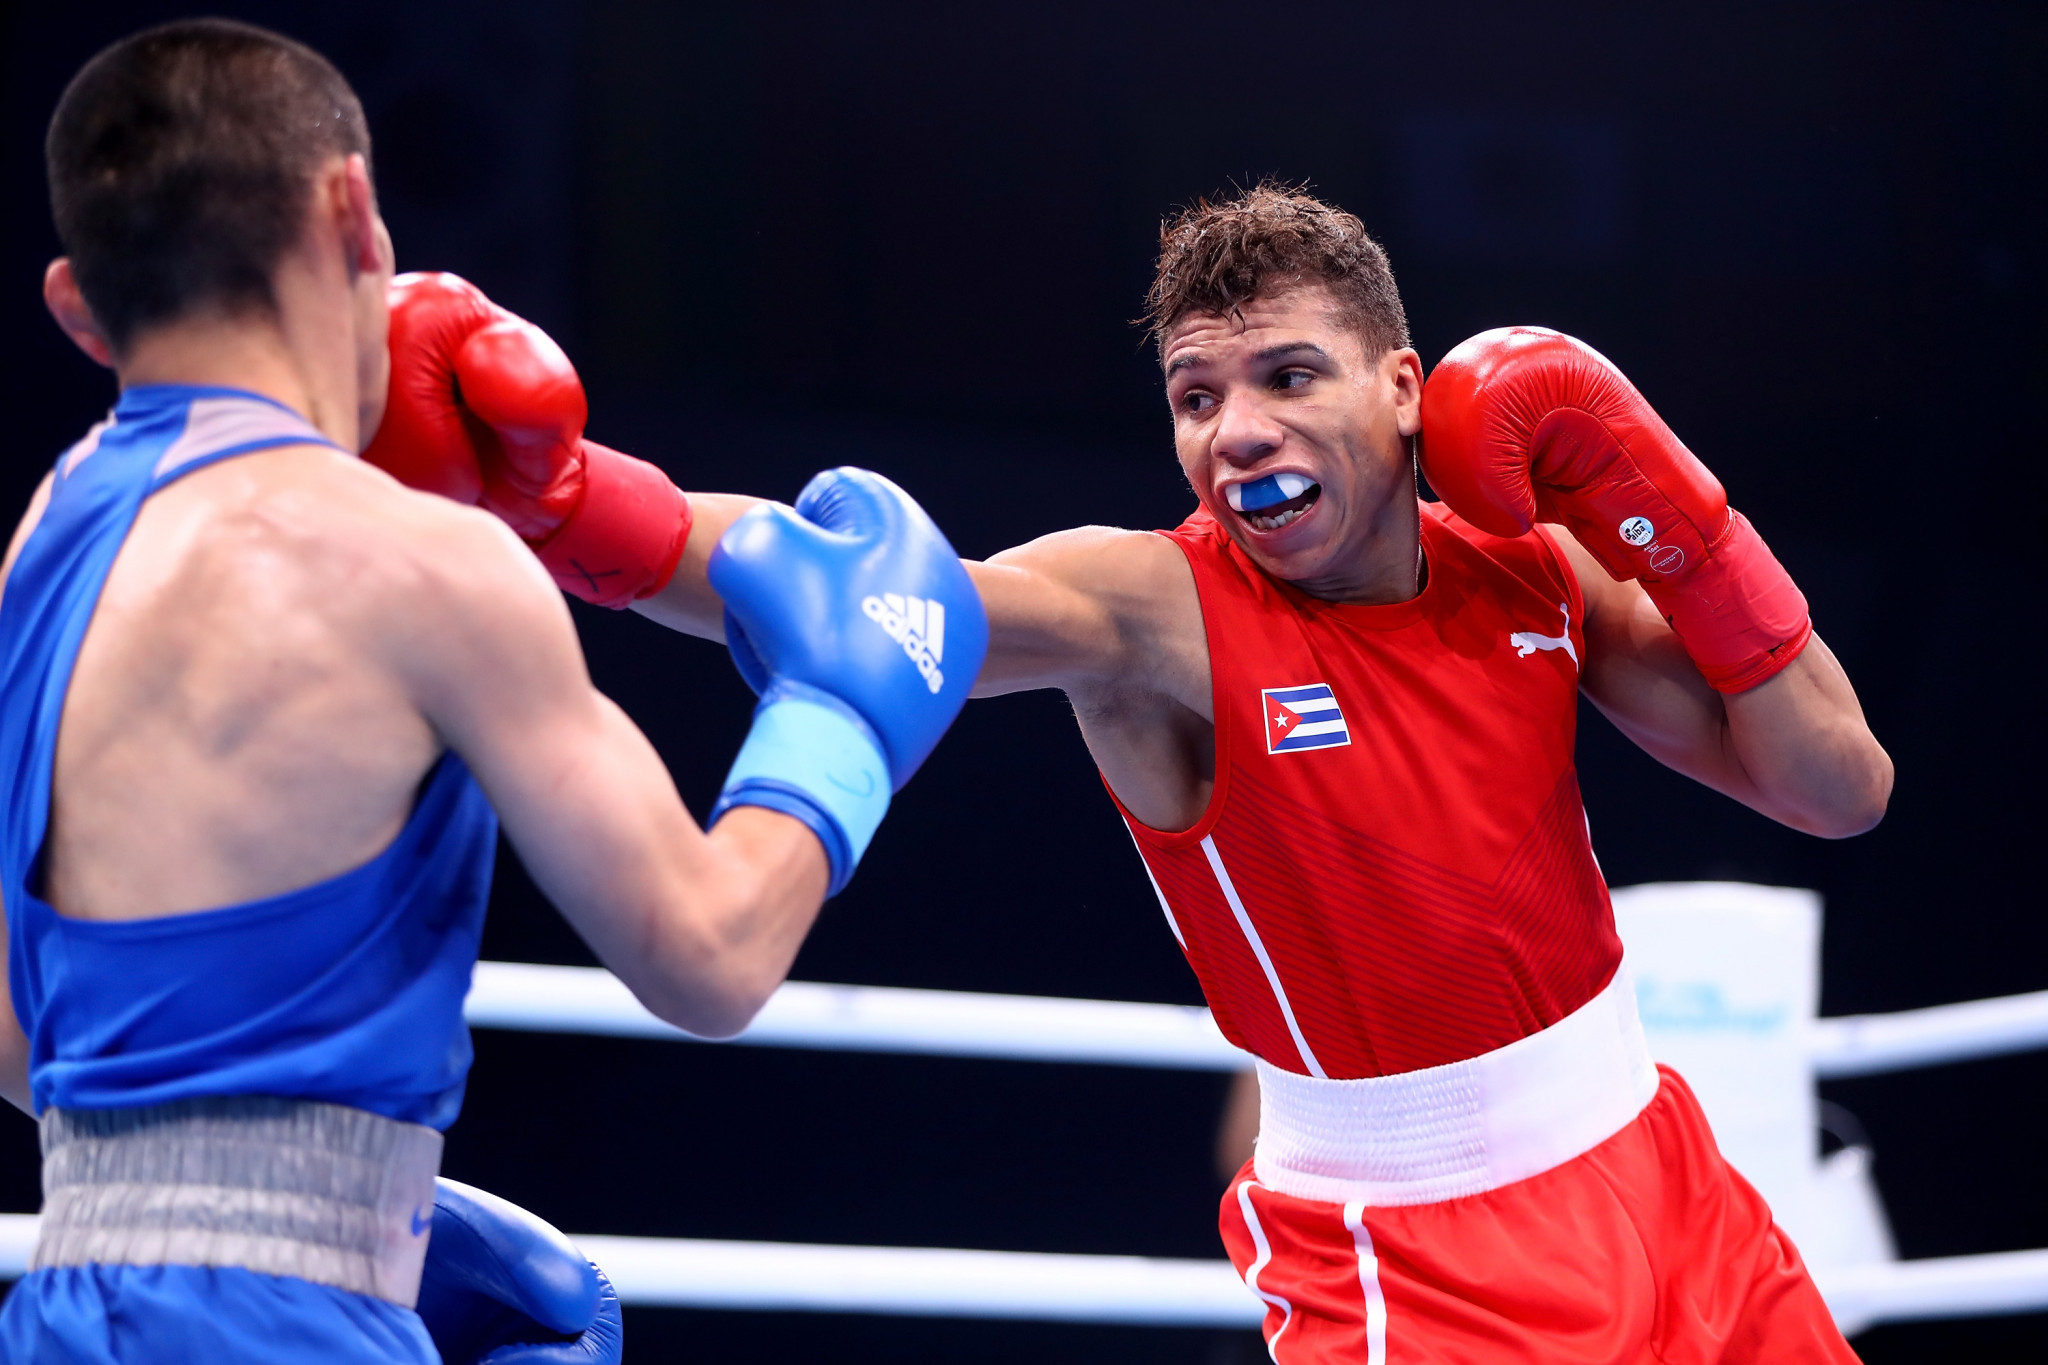 Tamir Galanov, left, lost to eventual gold medallist Yosvany Veitía of Cuba in the semi-finals of the flyweight event at the 2017 AIBA Men's World Championships in Hamburg ©Getty Images